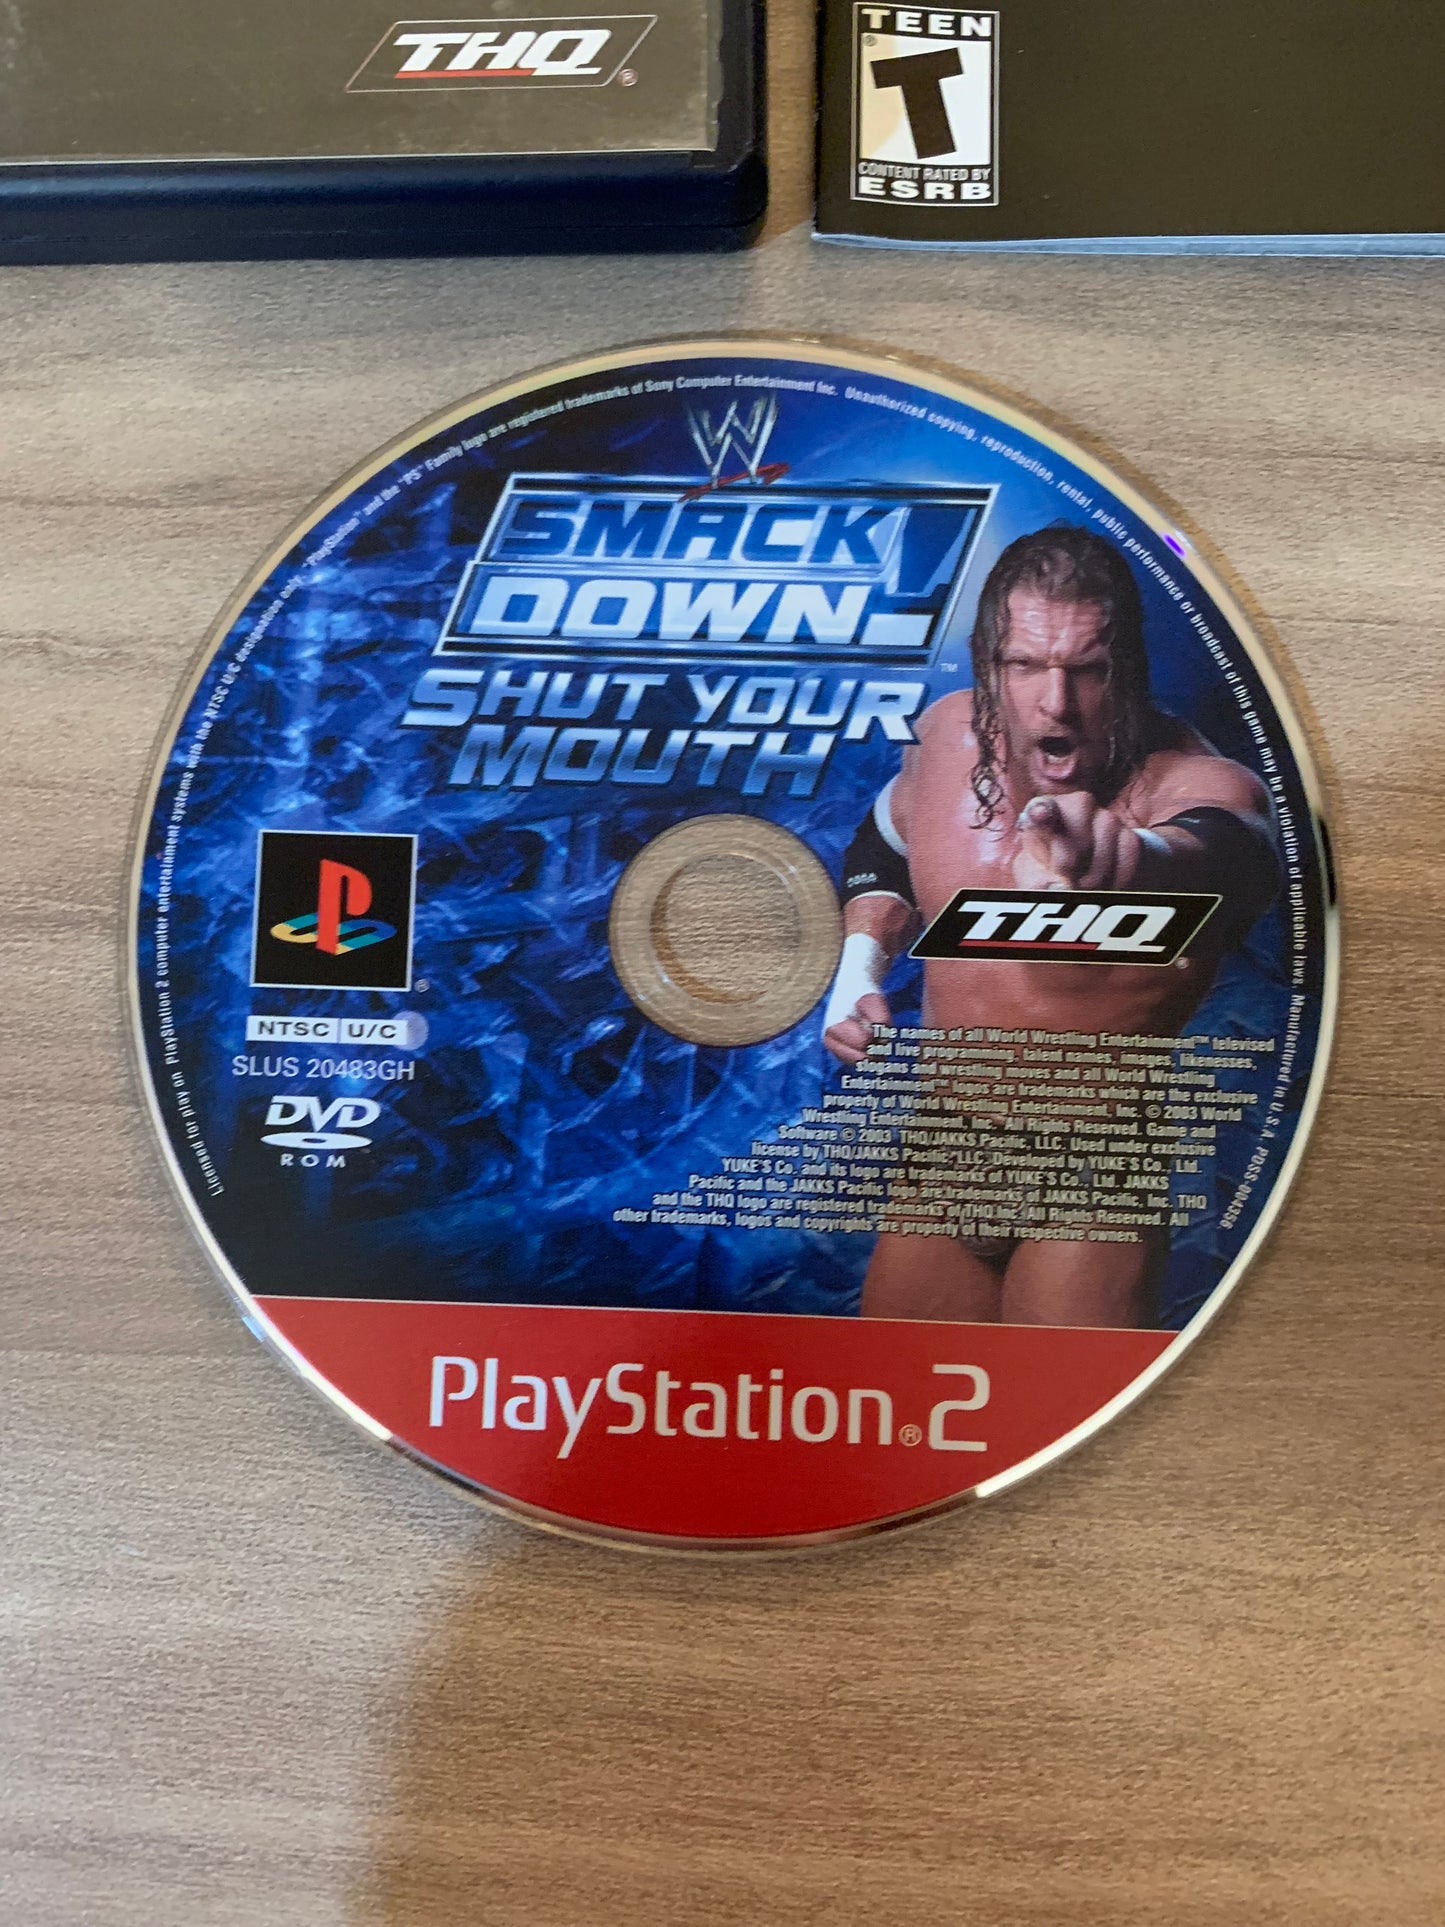 SONY PLAYSTATiON 2 [PS2] | WWE SMACKDOWN SHUT YOUR MOUTH | GREATEST HiTS